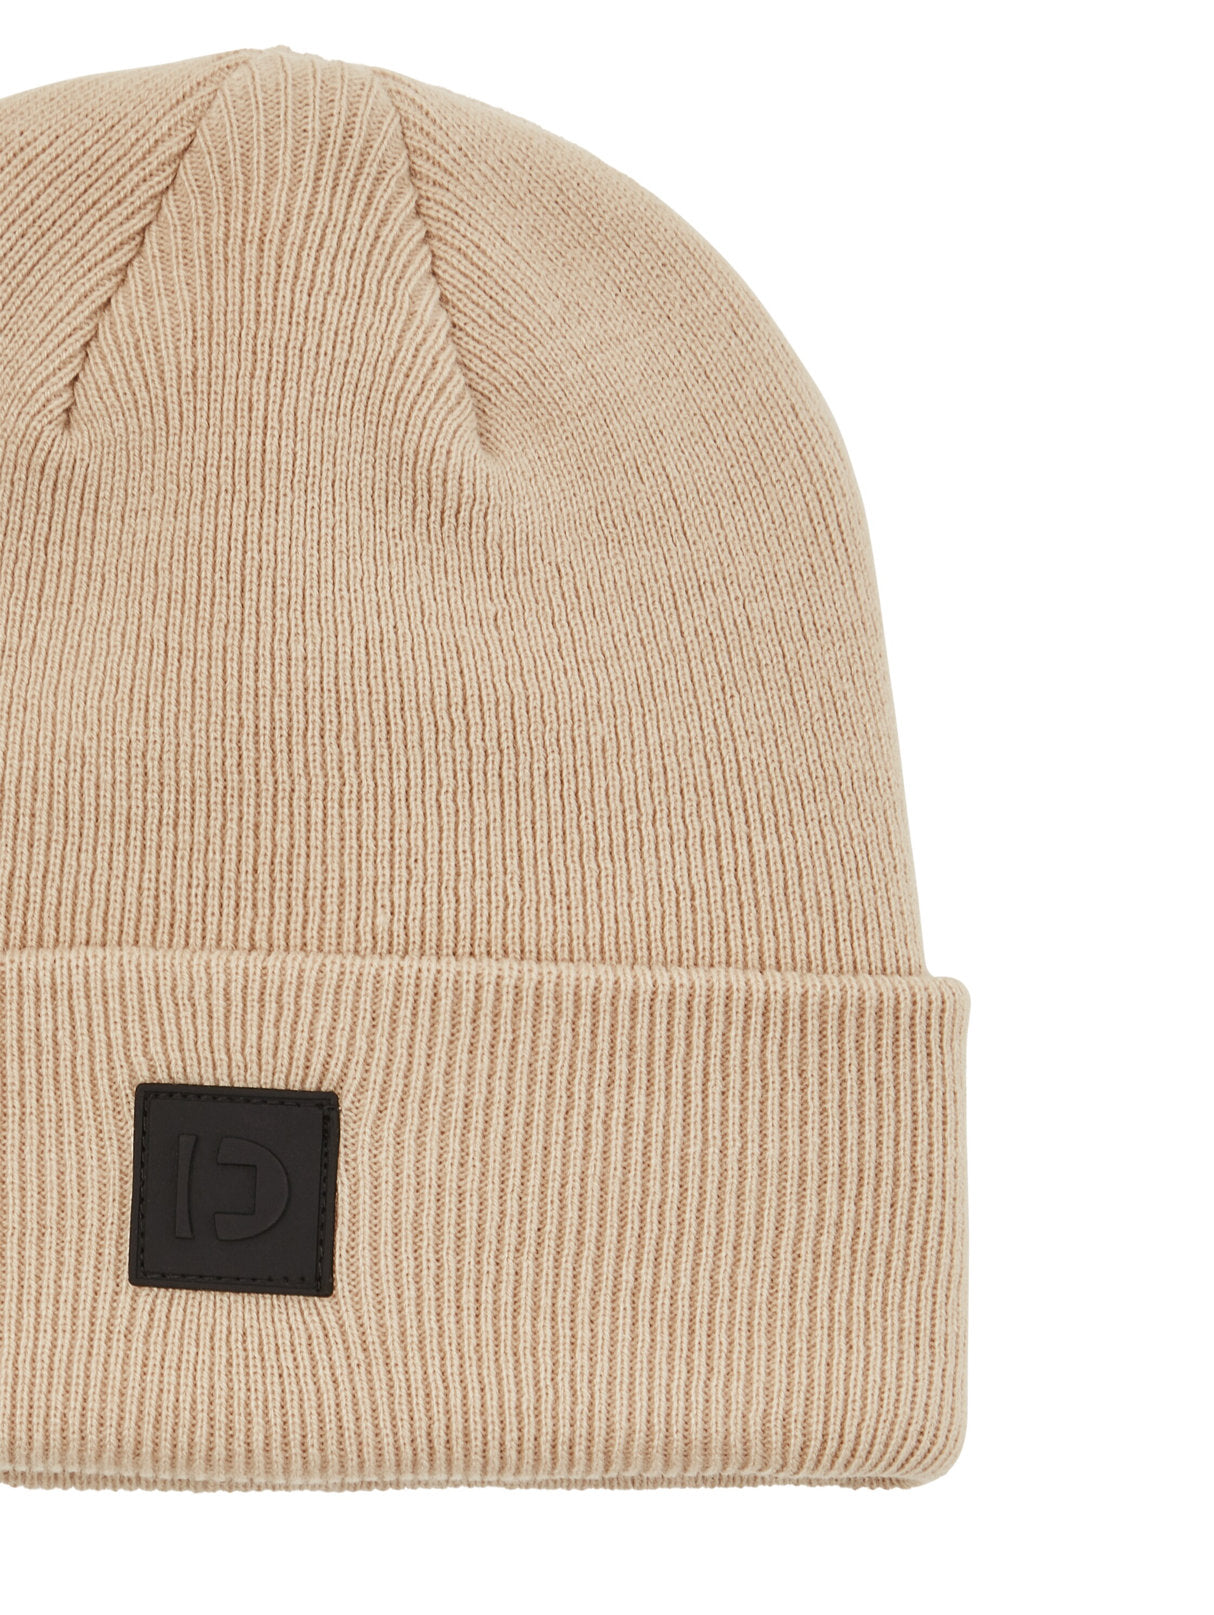 Knitted Beanie With Center Logo_1038673_11704_03